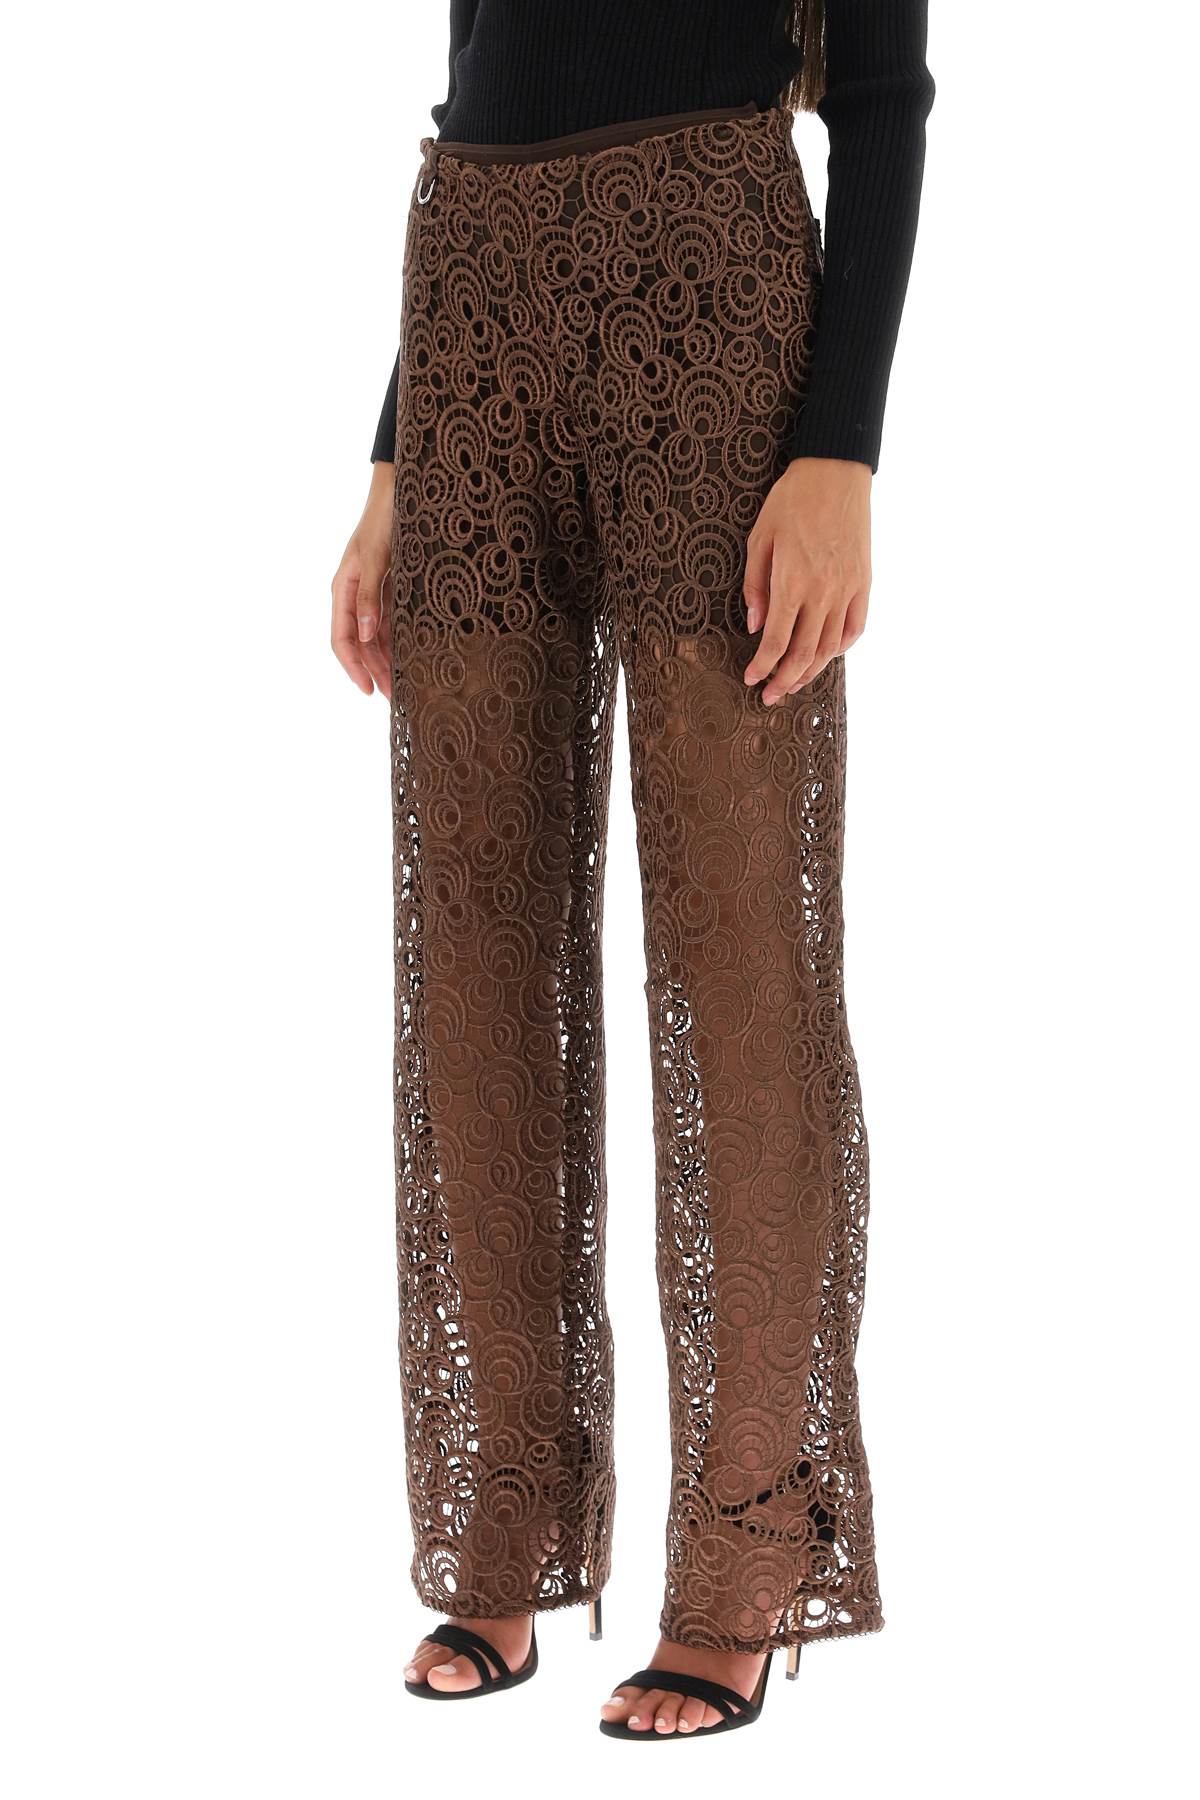 Saks potts 'trinity' pants in guipure lace-3